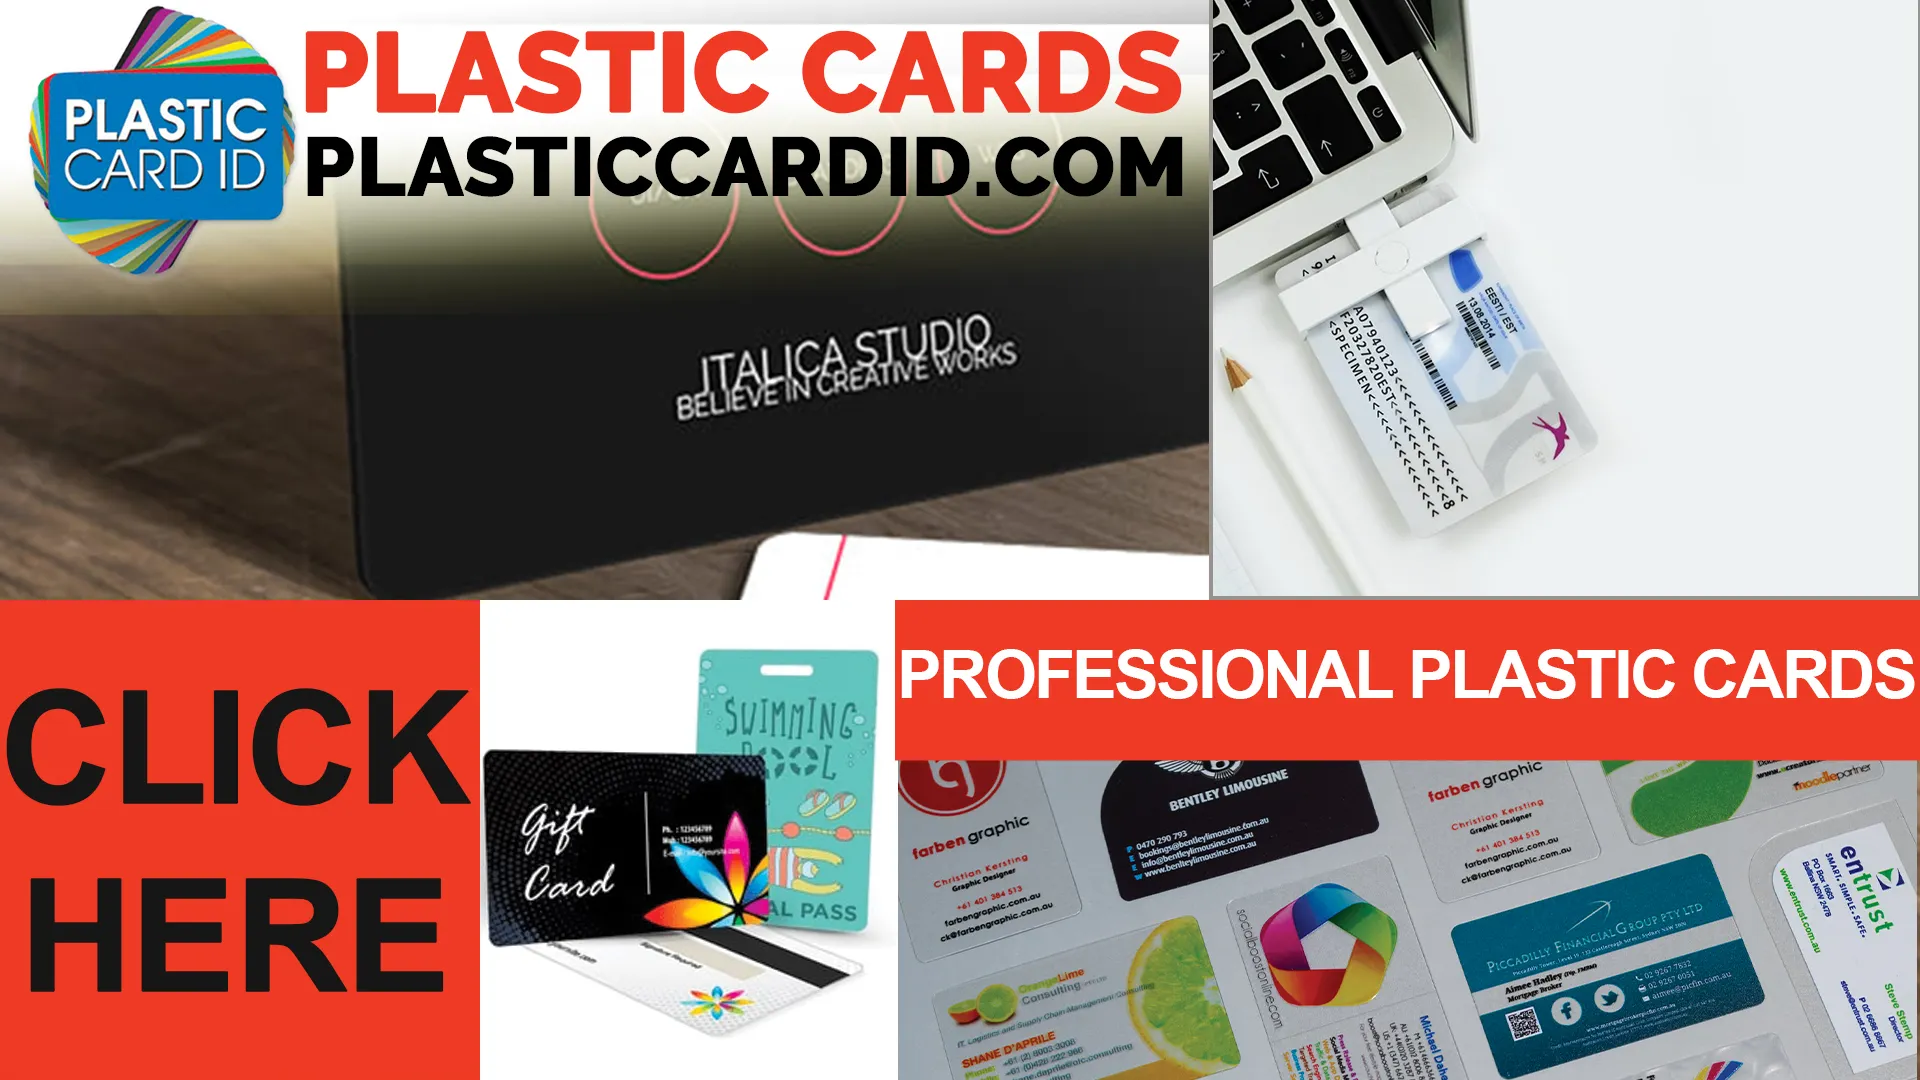 The Next Generation of Plastic Cards